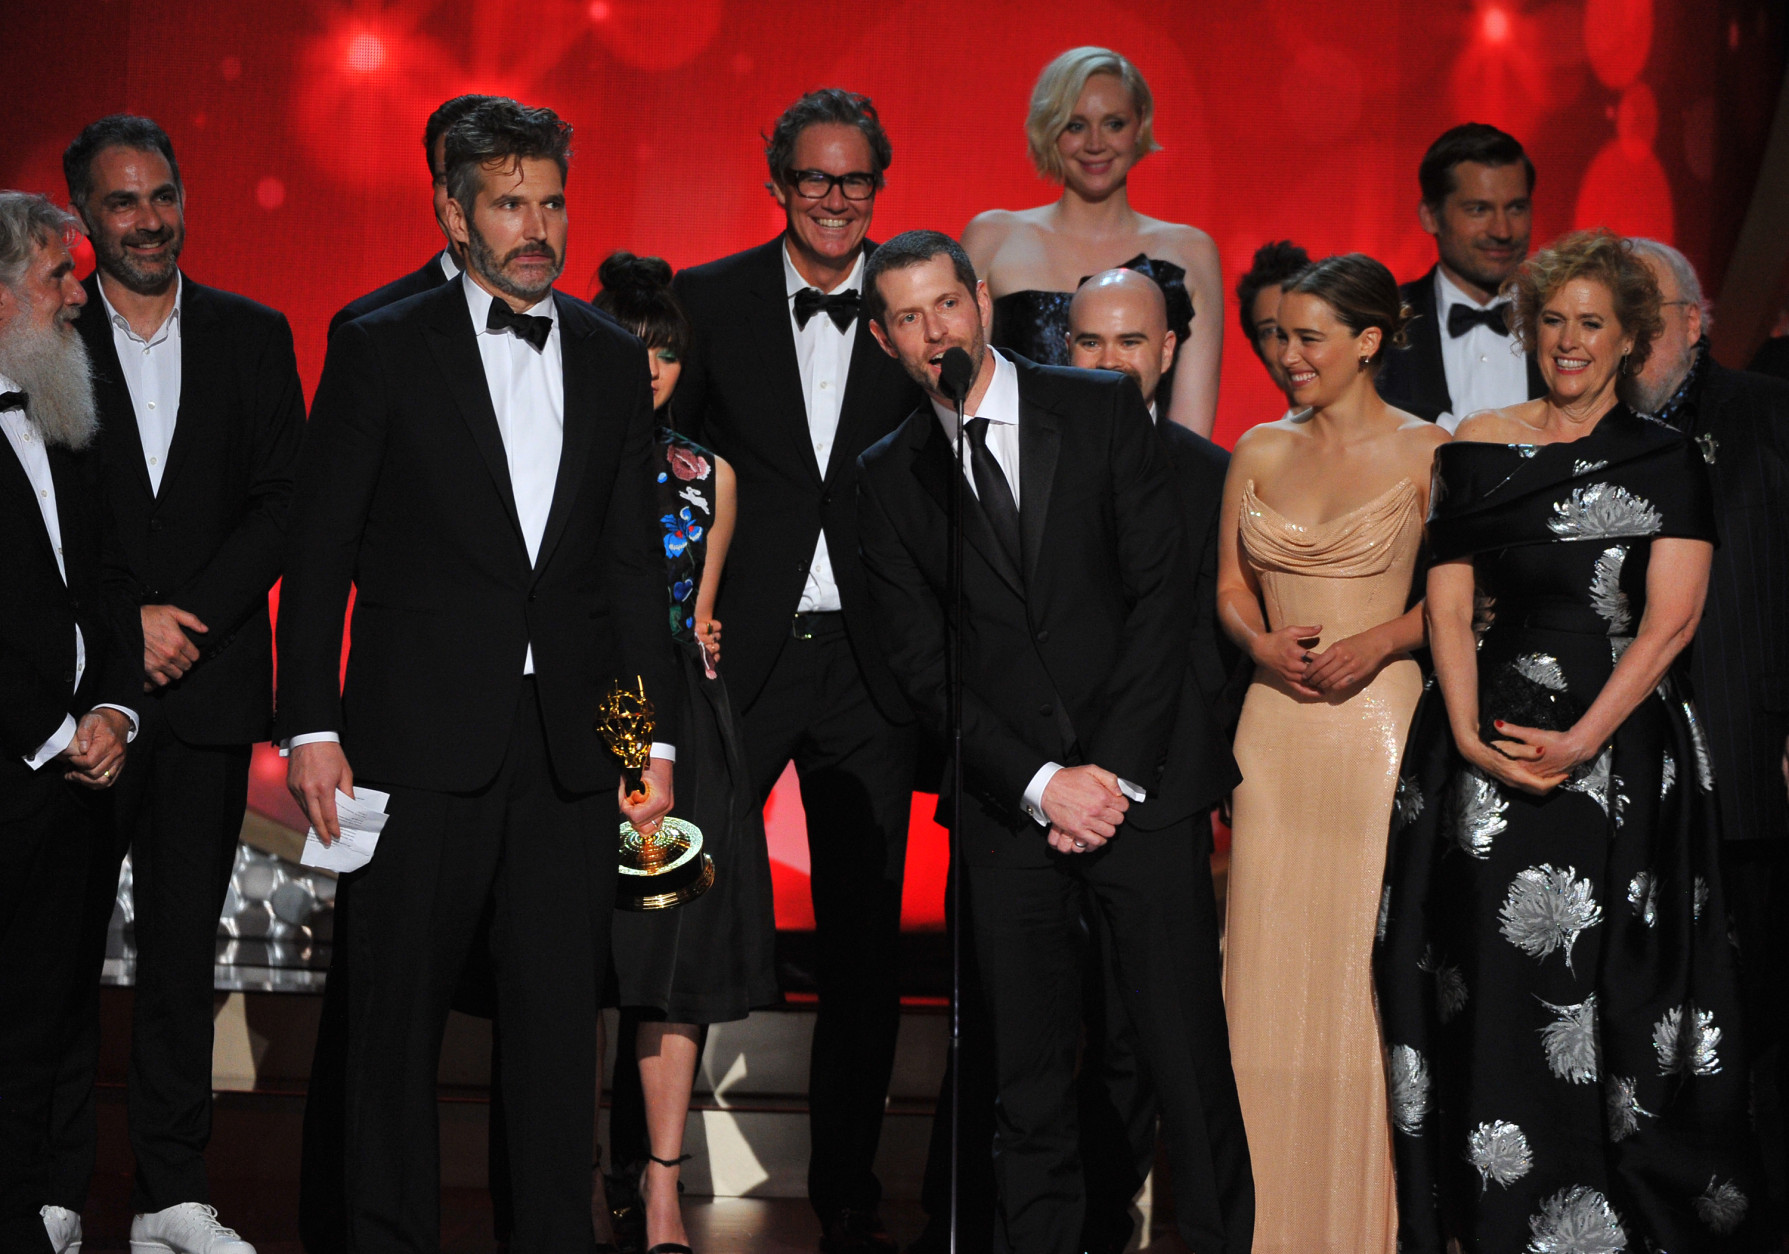 D.B Weiss, along with the cast and crew from Game of Thrones accept the award for outstanding drama series at the 68th Primetime Emmy Awards on Sunday, Sept. 18, 2016, at the Microsoft Theater in Los Angeles. (Photo by Vince Bucci/Invision for the Television Academy/AP Images)